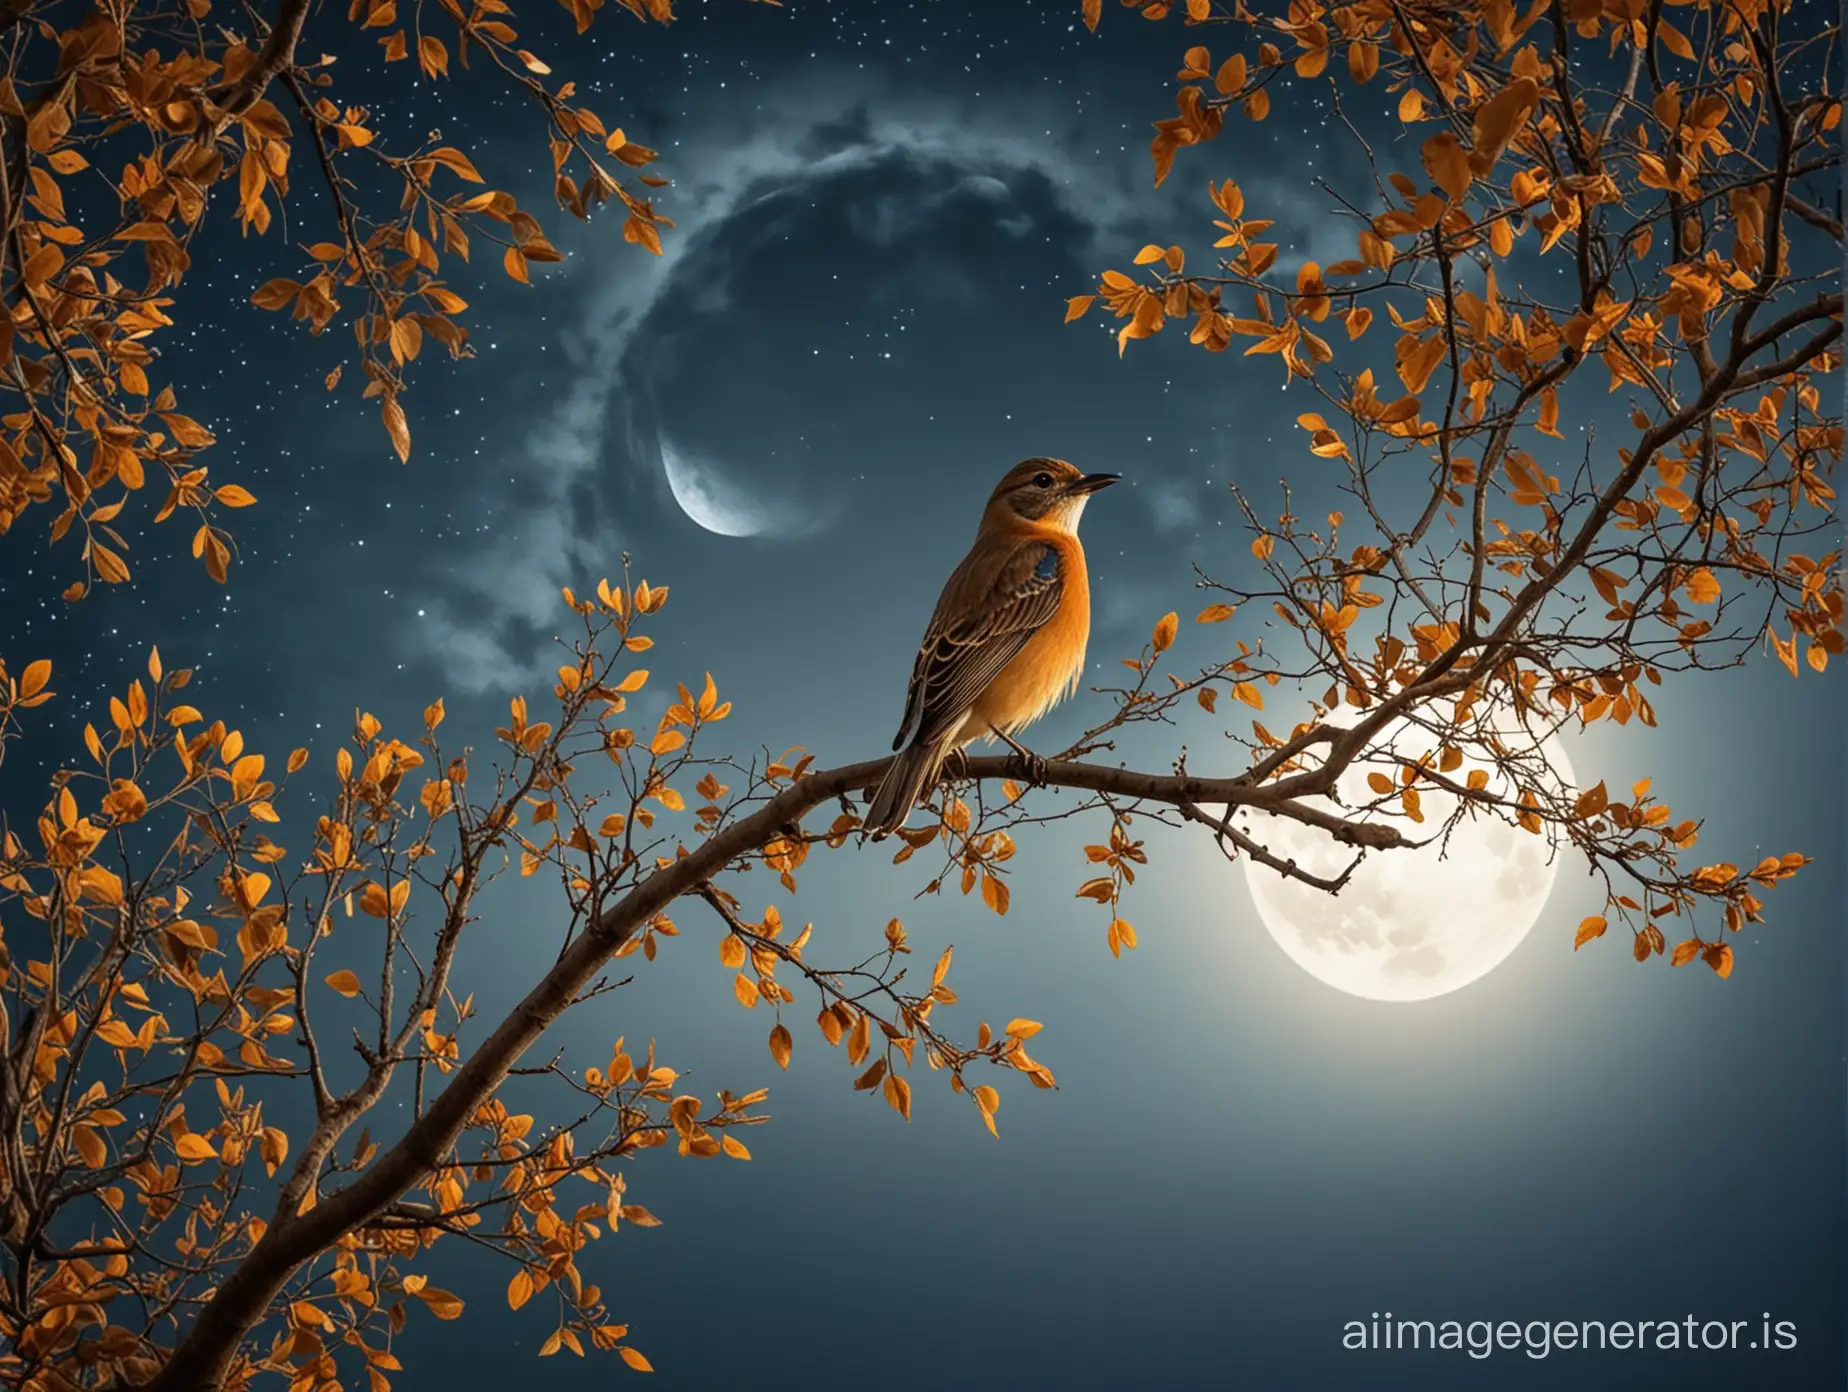 Majestic-Bird-Perched-on-Moonlit-Tree-Branch-with-Abundant-Leaves